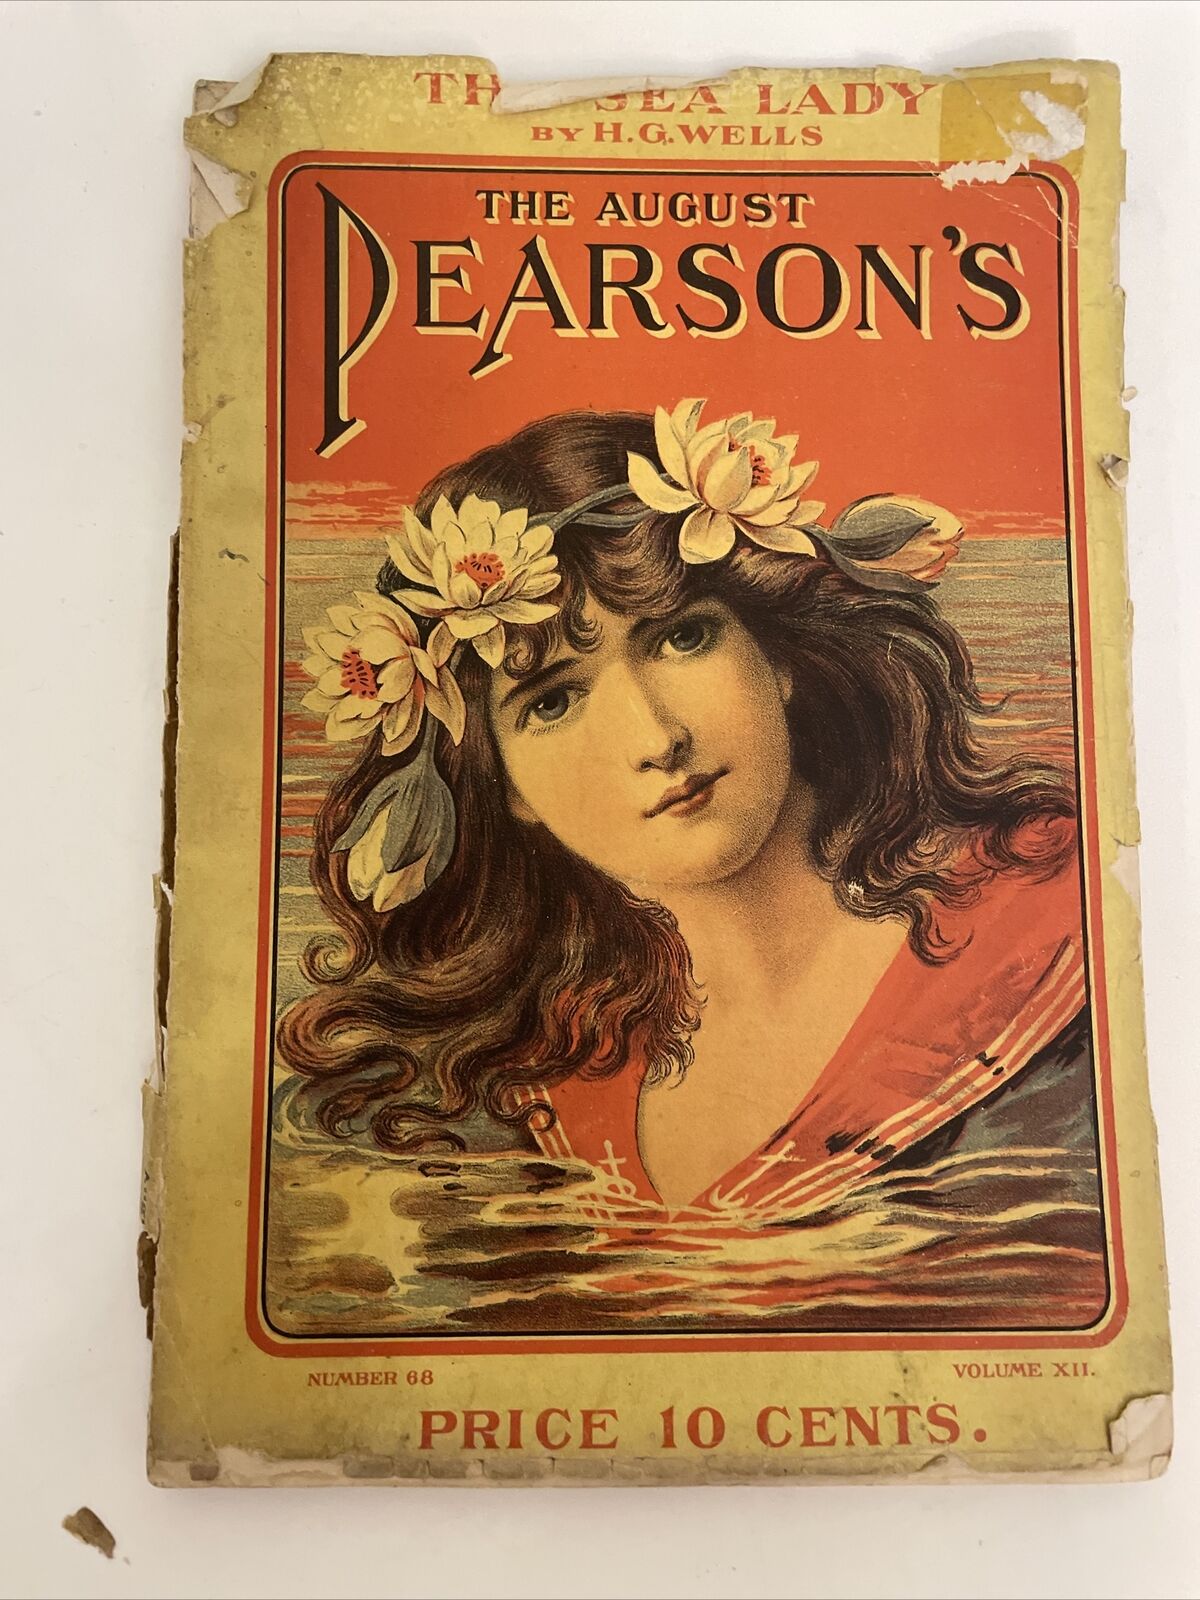 The Pearson's Vintage Magazine 1901 Sea  August The Sea Lady by H G Wells